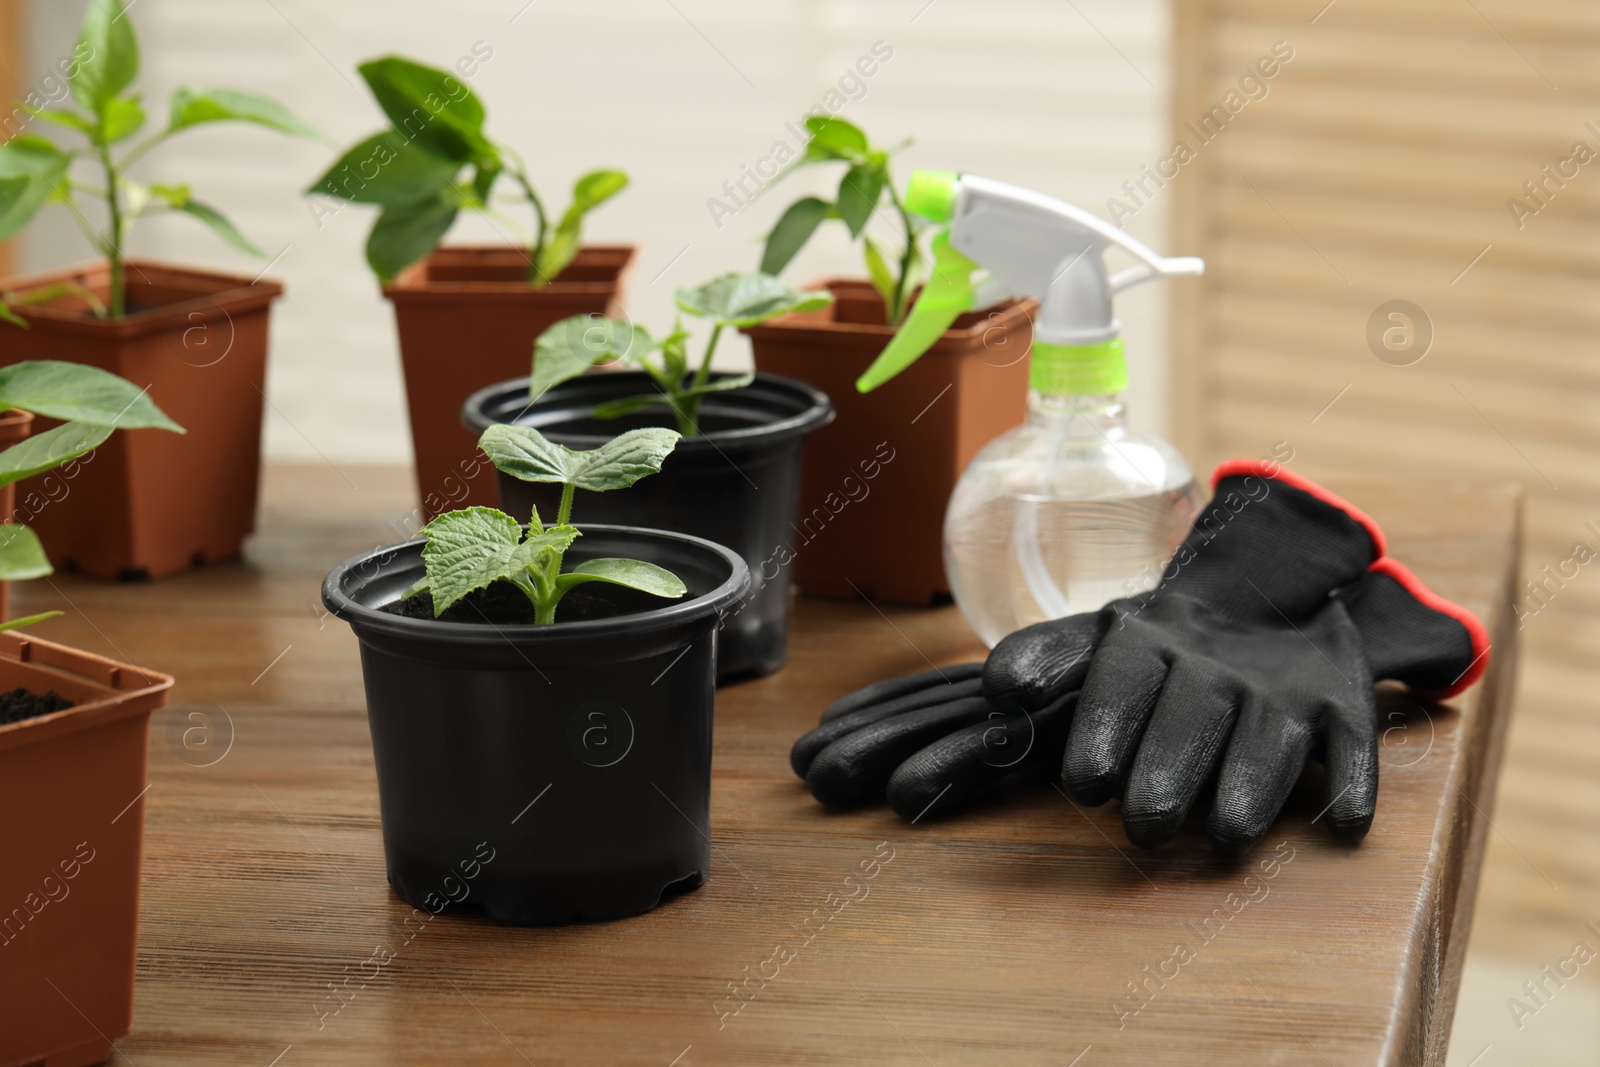 Photo of Seedlings growing in plastic containers with soil, gardening gloves and spray bottle on wooden table